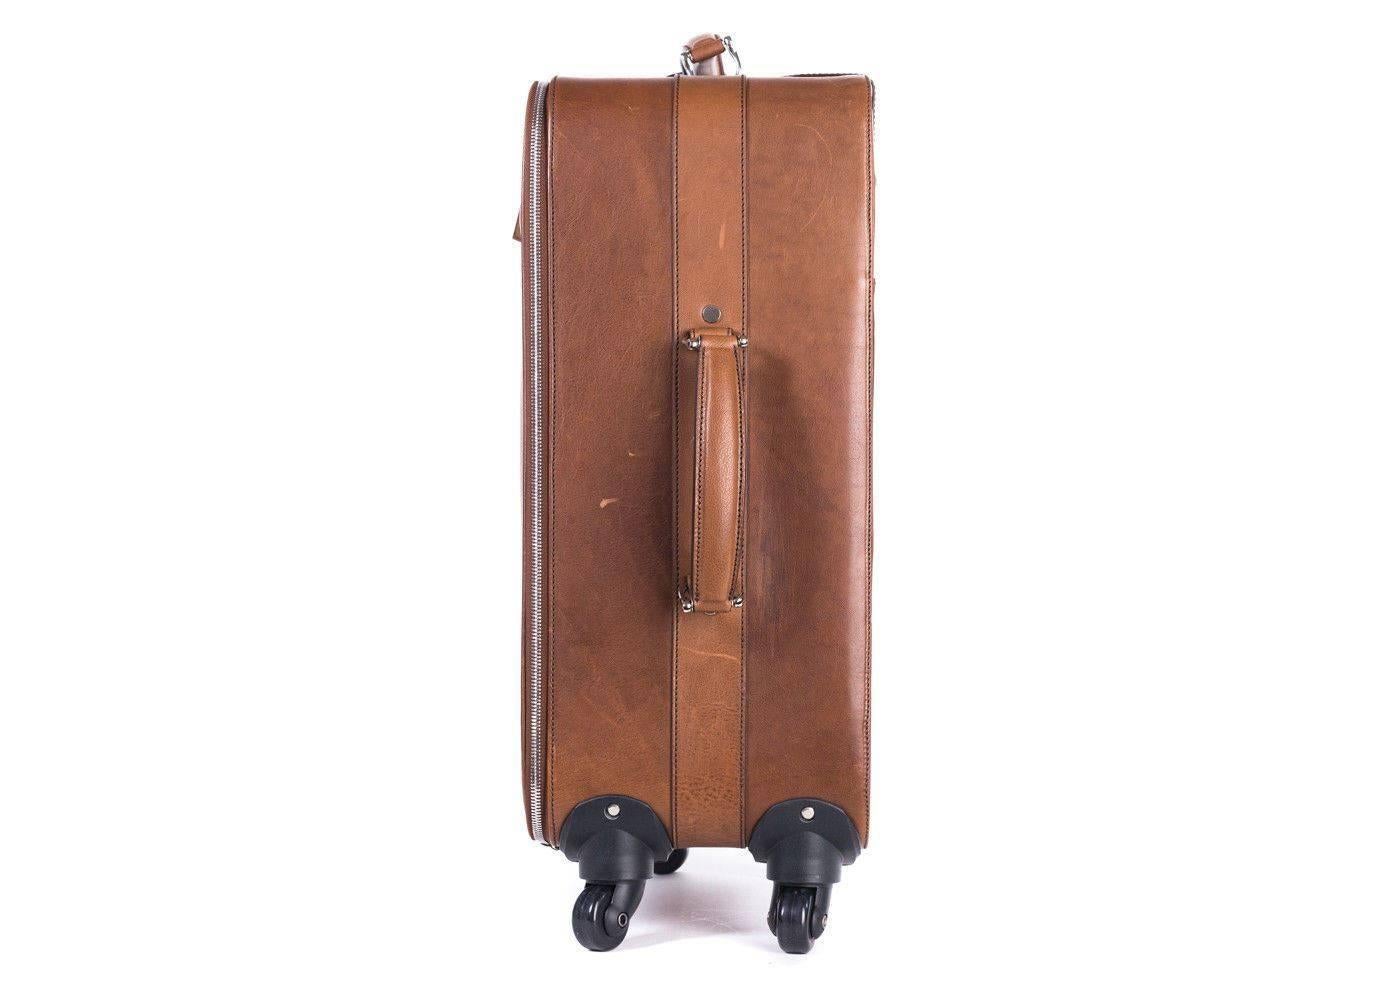 Brand New Brunello Cucinelli Trolley Bag
Dust Bag Included
Retails in Stores & Online for $5195


A refined choice for anyone, Brunello Cucinelli 's trolley case has been crafted in Italy from brown calfskin leather. It has a capacious interior with